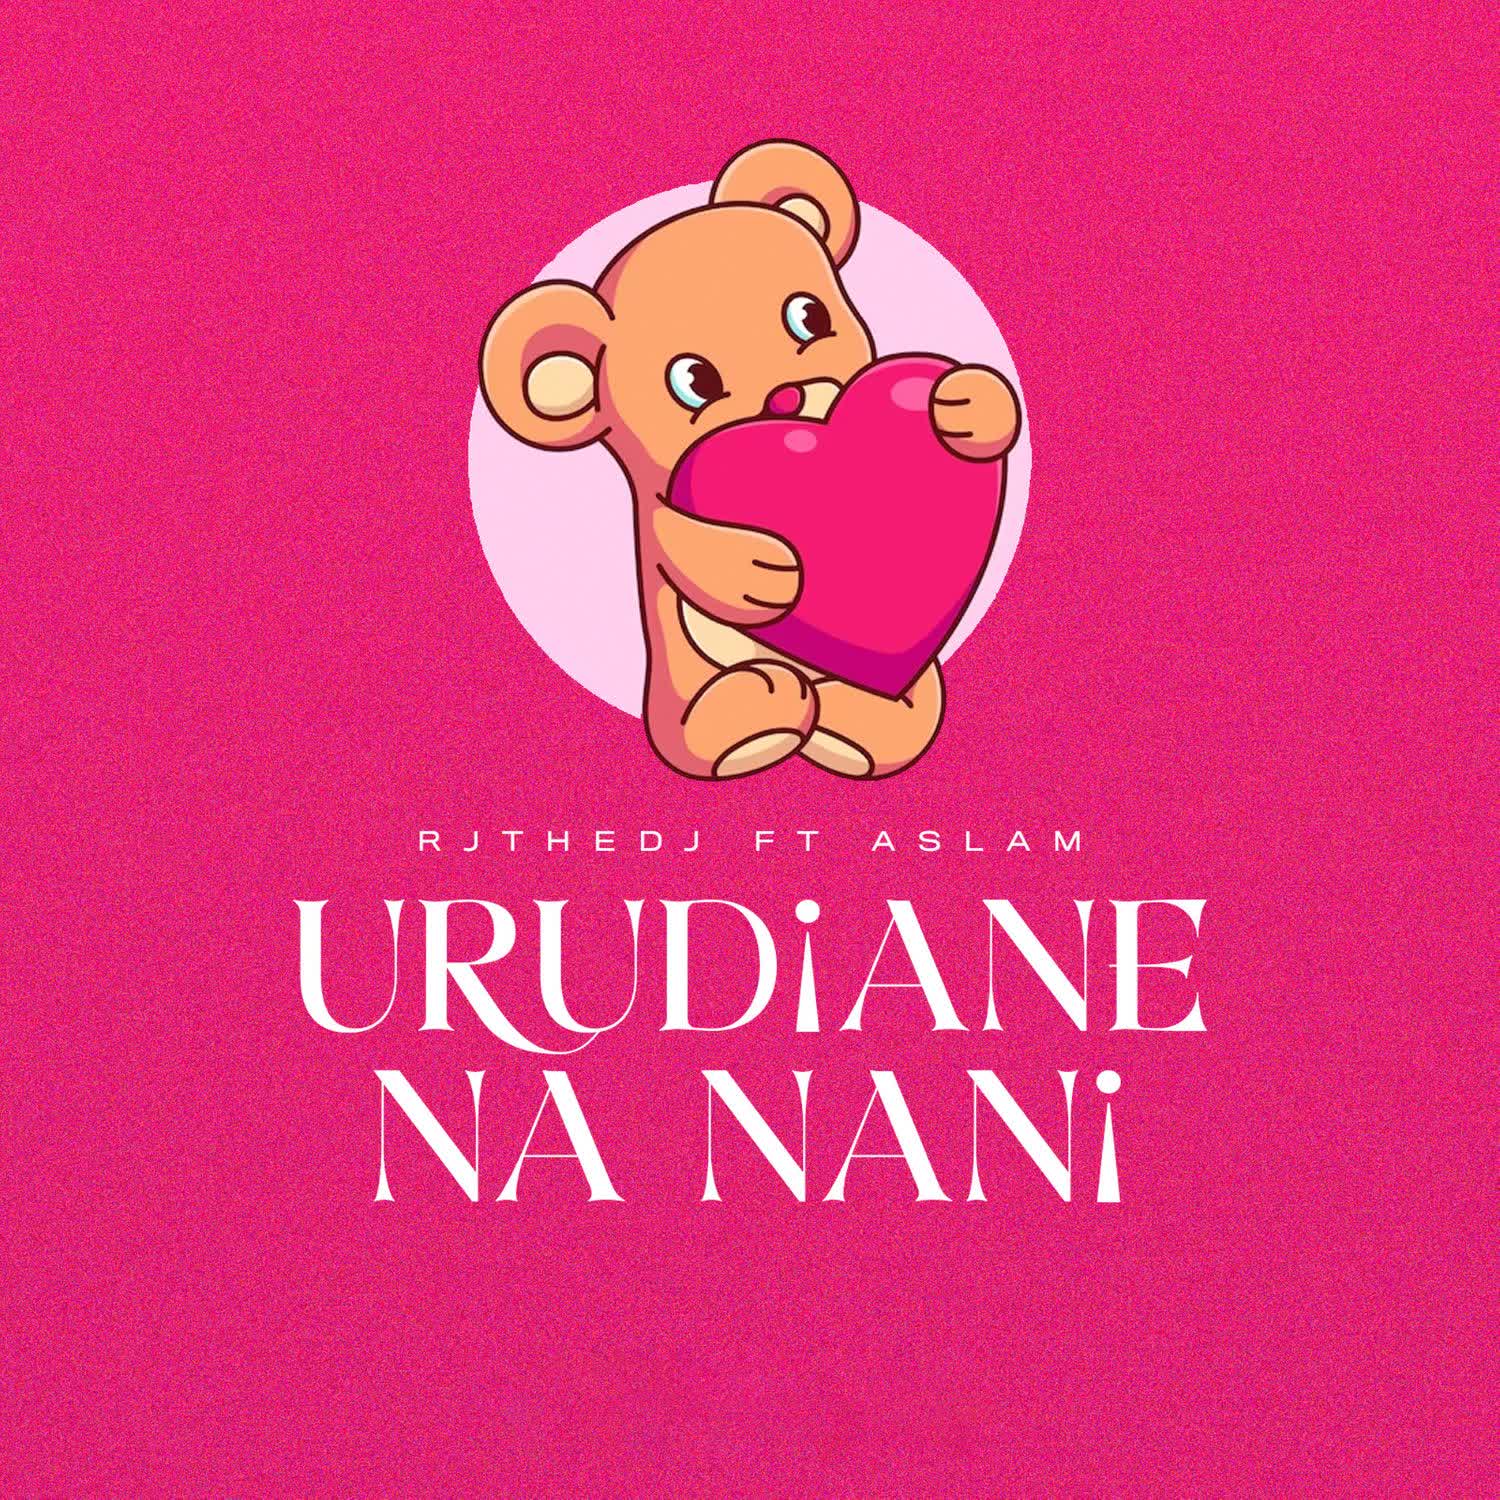 AUDIO | Rj The Dj Ft. Aslam – Urudiane Na Nani | Download<br />
<b>Deprecated</b>:  strip_tags(): Passing null to parameter #1 ($string) of type string is deprecated in <b>/home/djmwanga/public_html/wp-content/themes/Newsmag/loop-single.php</b> on line <b>60</b><br />
